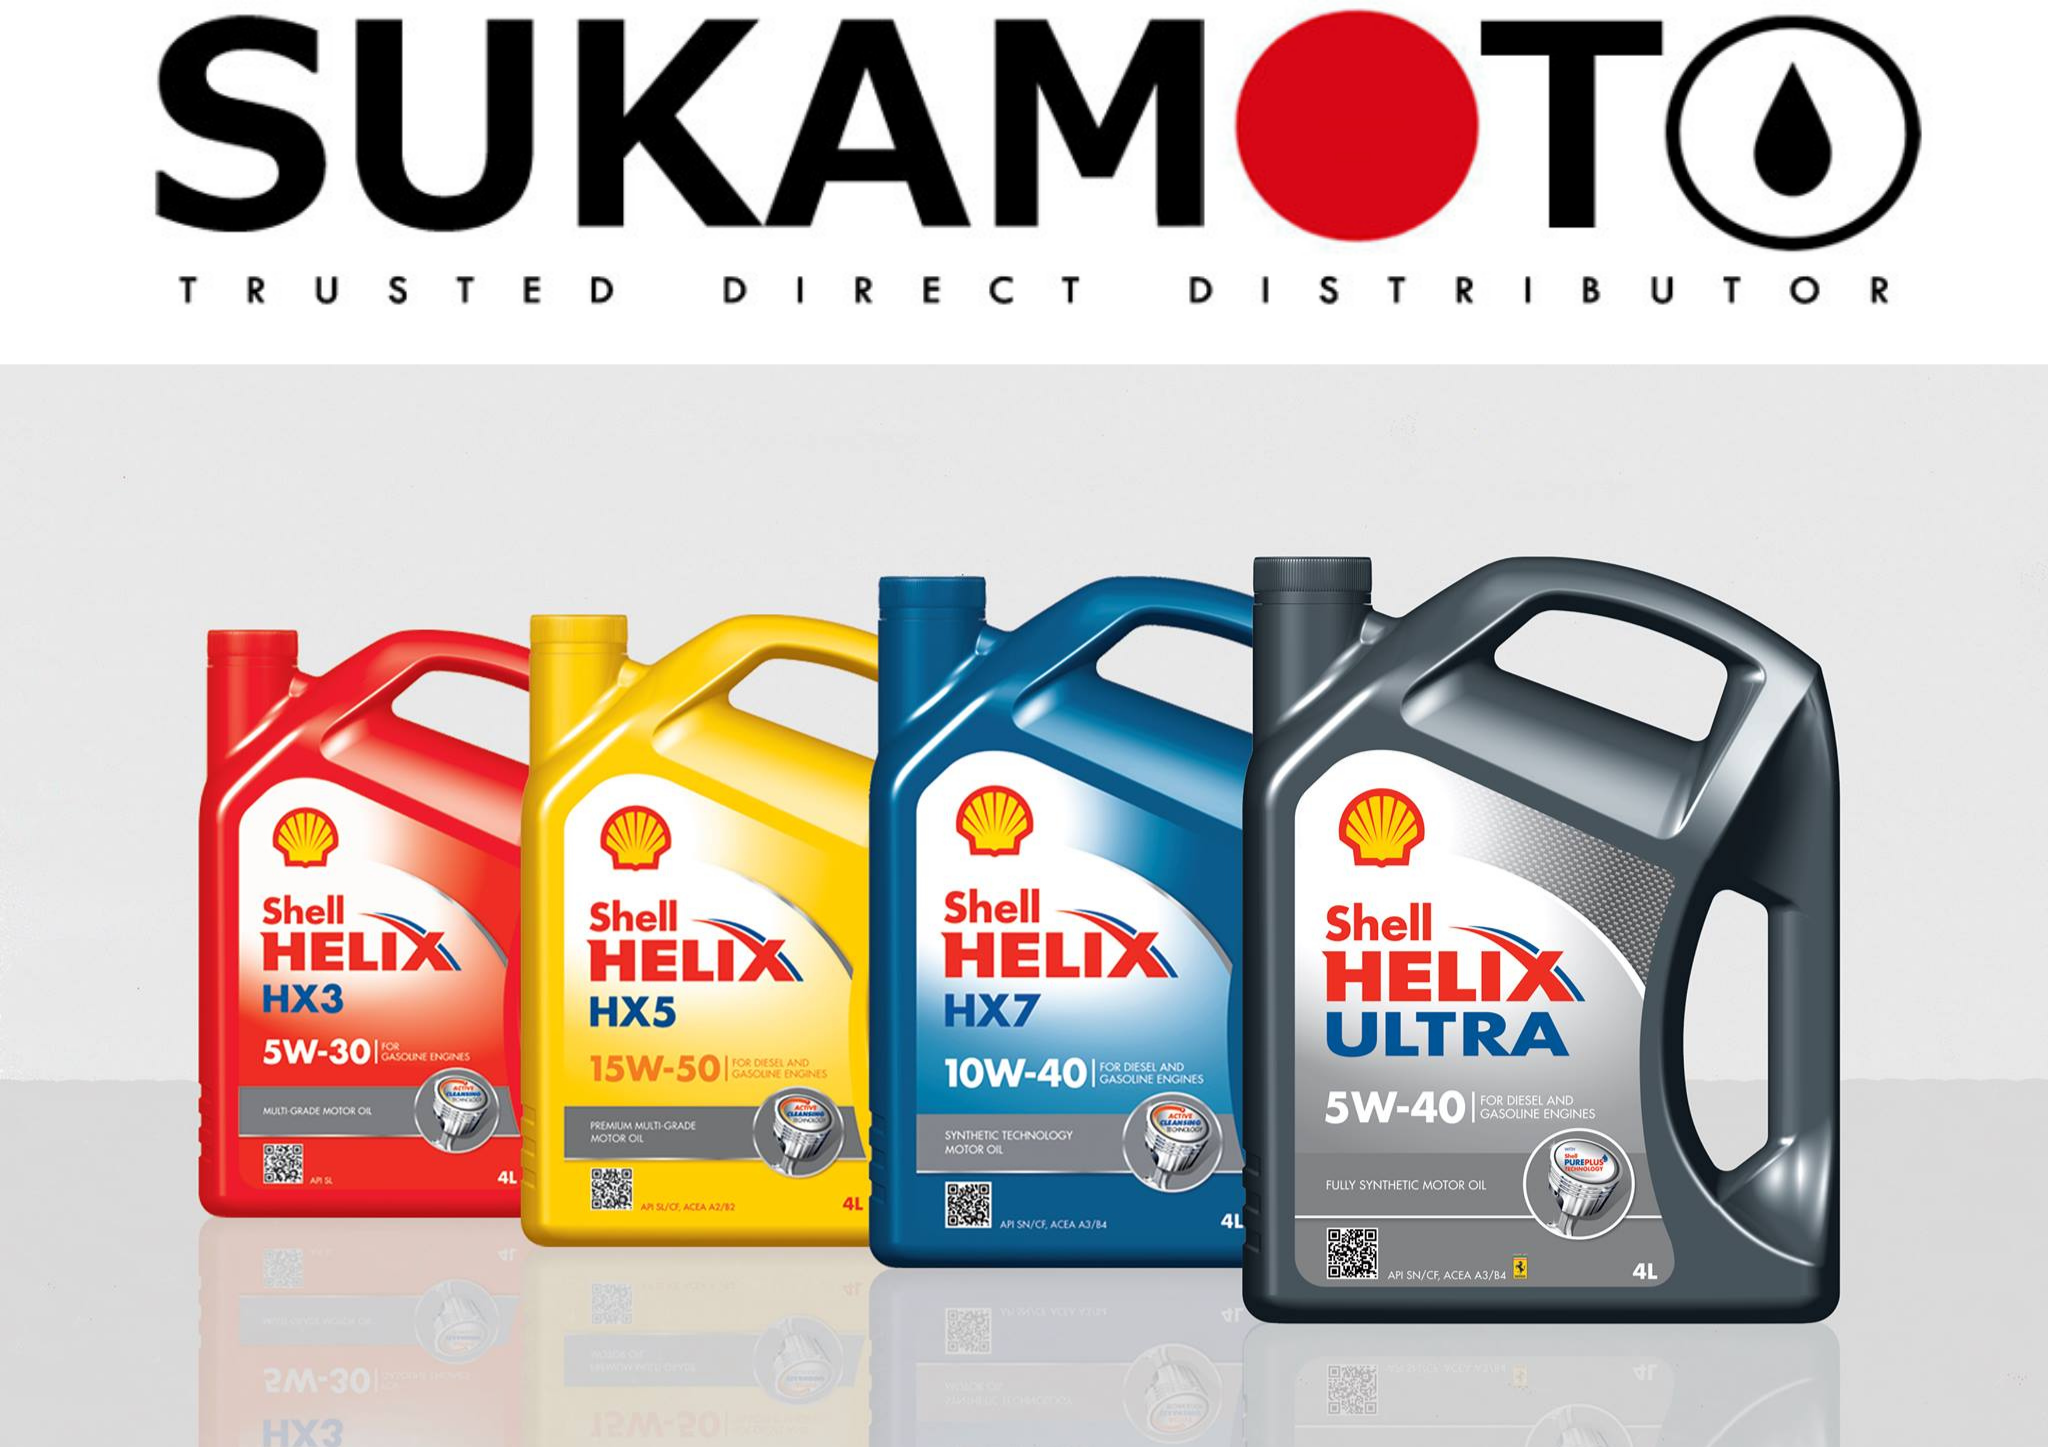 SHELL HELIX ULTRA 5W-40 / HX7 10W-40 / HX5 15W-40 Fully Synthetic / Semi-Synthetic / Mineral Engine Oil 4L